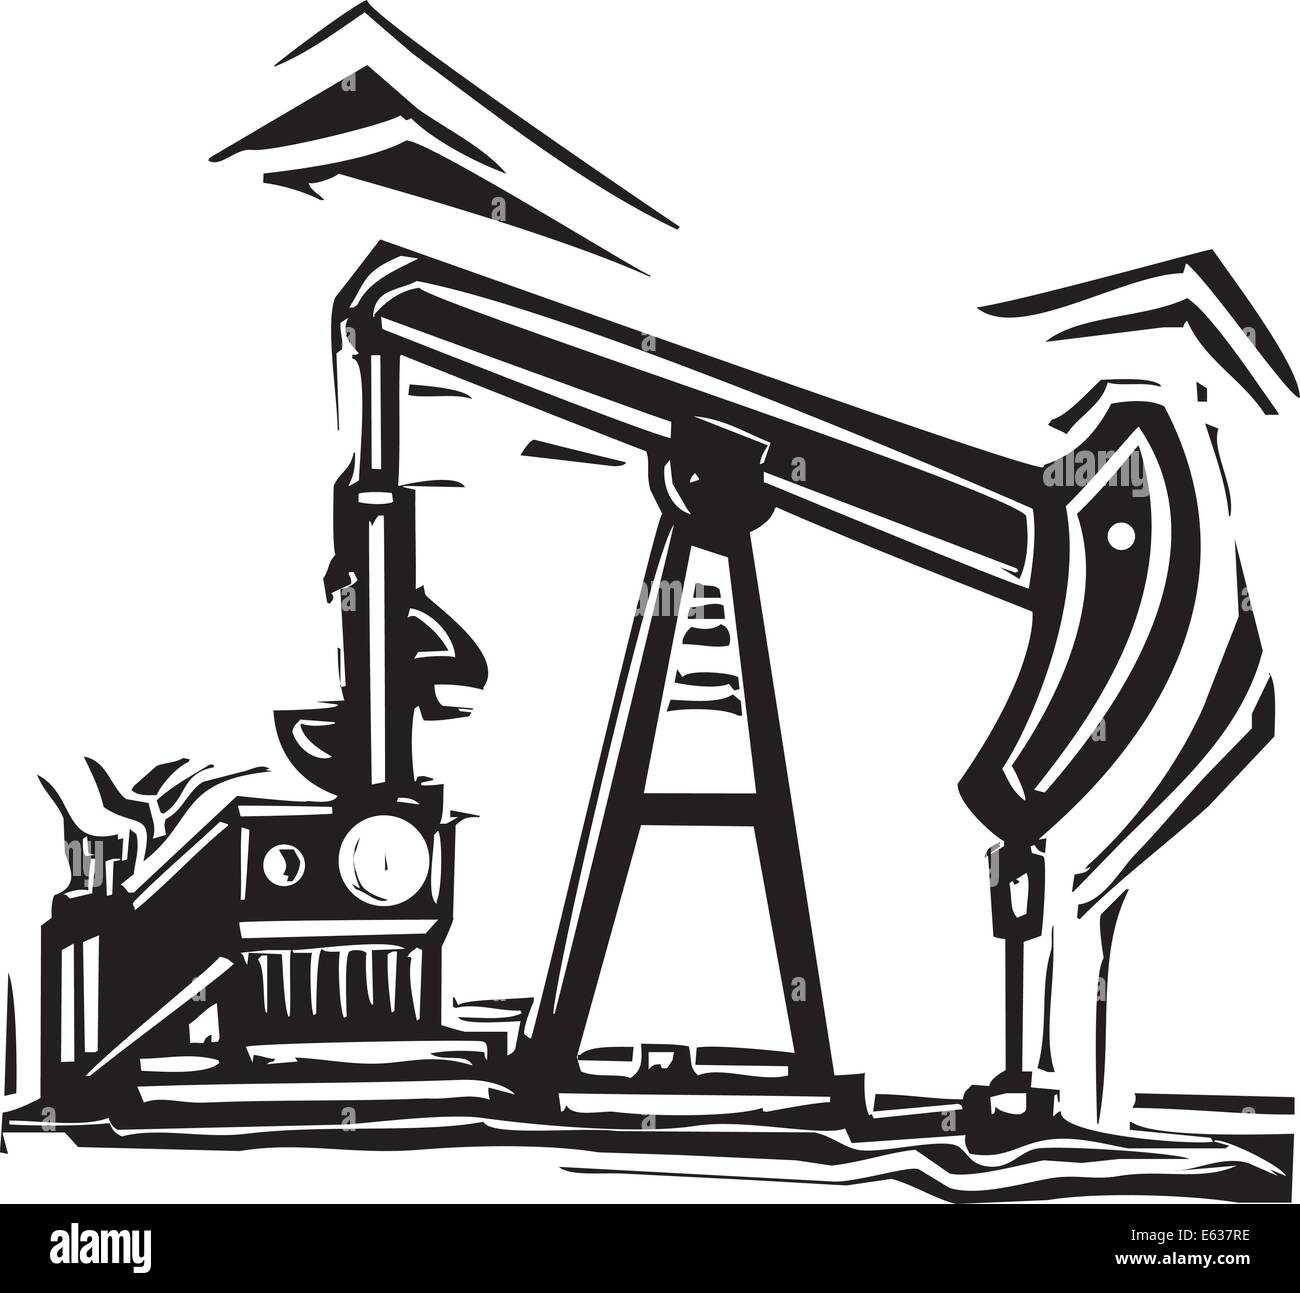 Woodcut Style image of an Oil industry oil well pumpjack pumping oil. Stock Vector